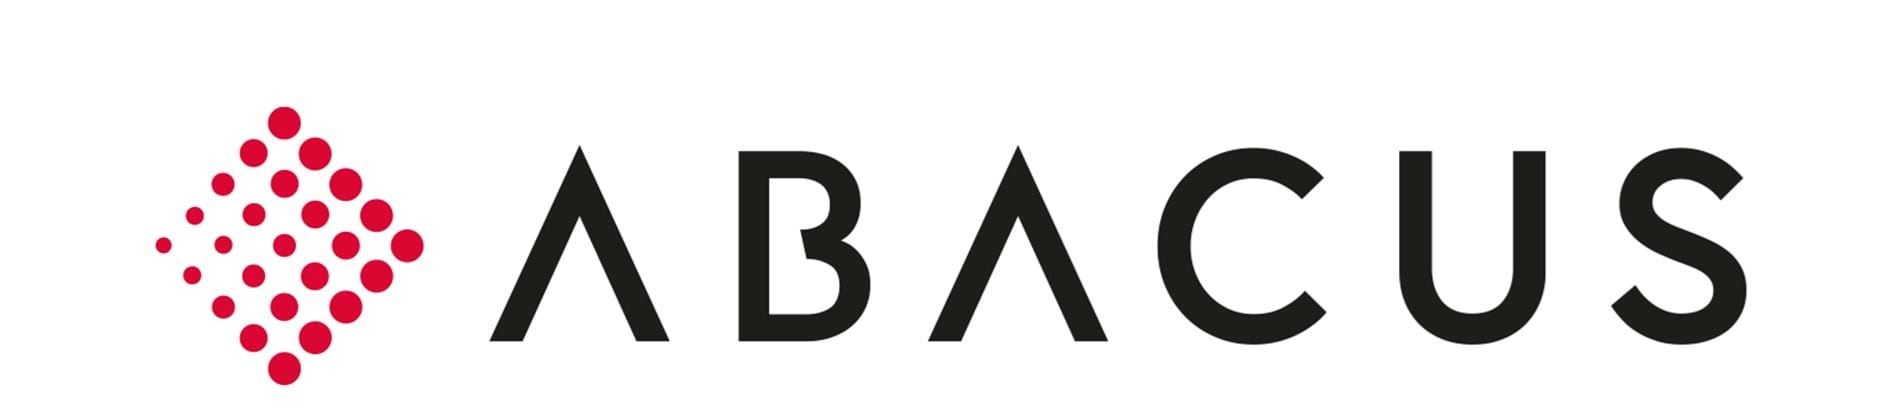 Abacus Research AG logo